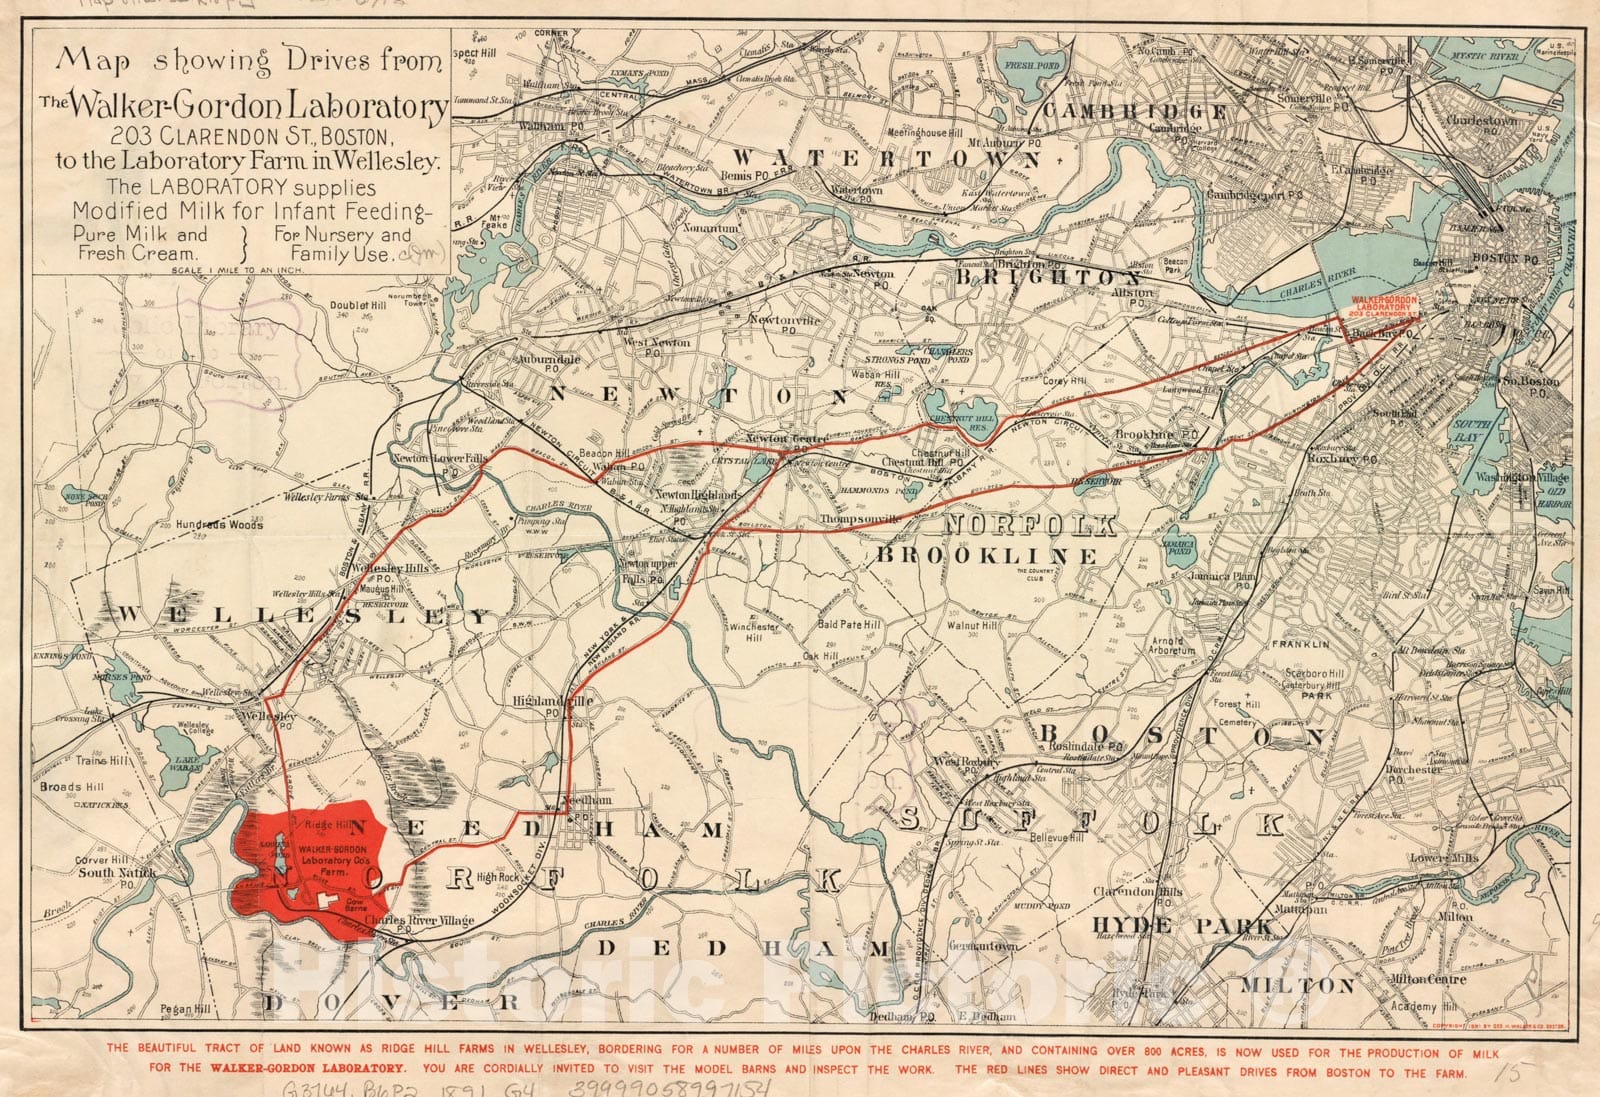 Historical Map, ca. 1891 Map Showing Drives from The Walker-Gordon Laboratory, 203 Claredon St, Boston, to The Laboratory Farm in Wellesley, Vintage Wall Art